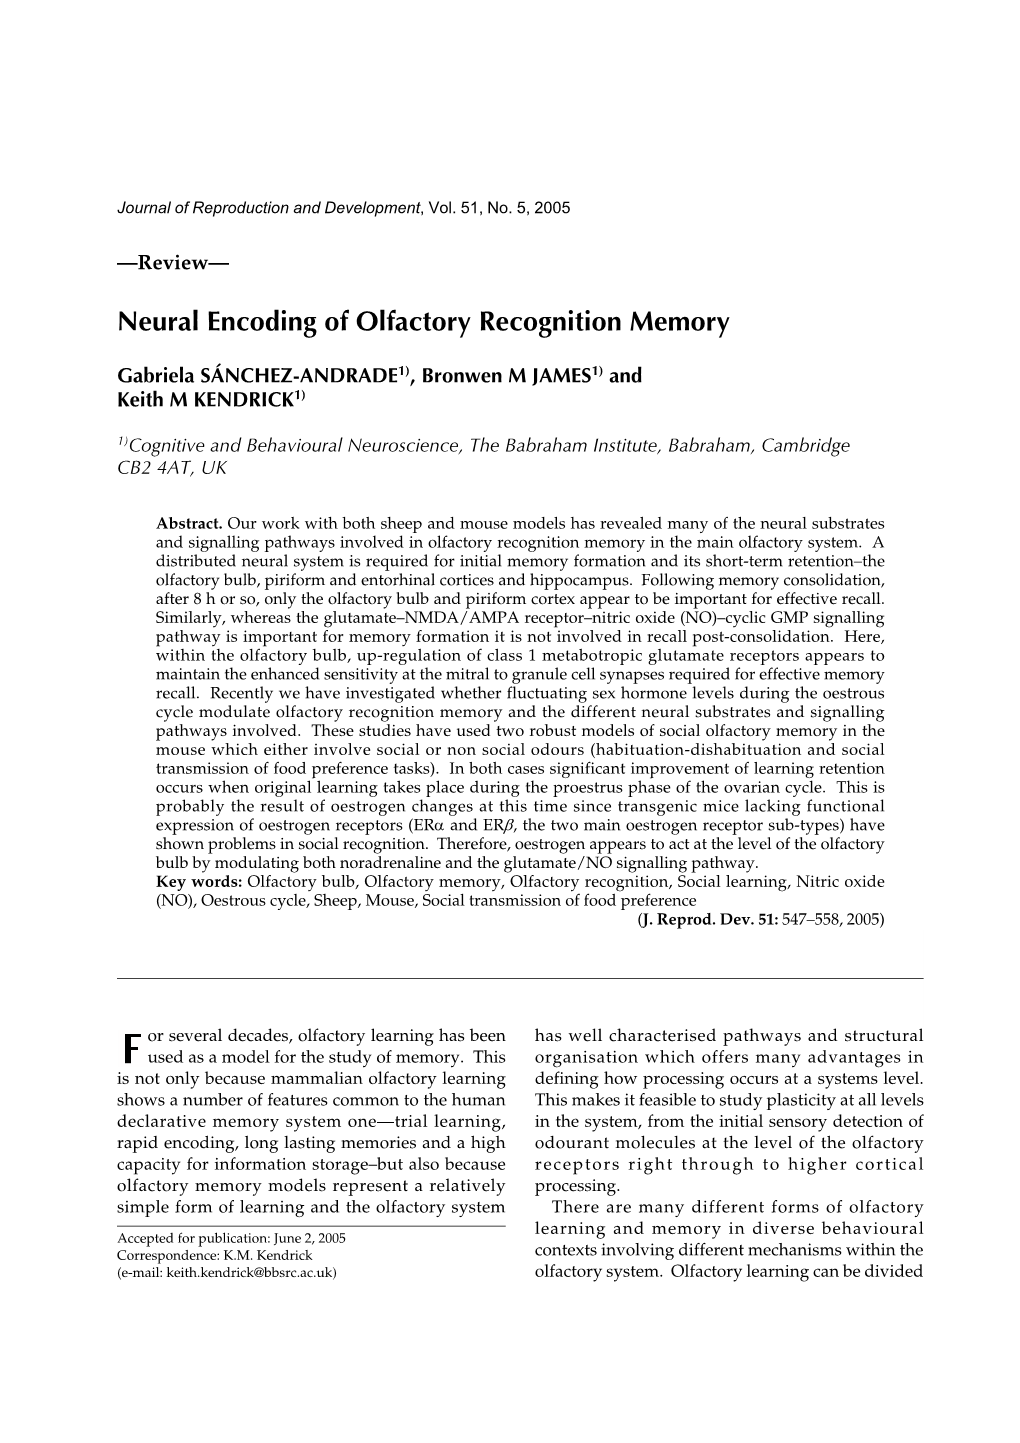 Neural Encoding of Olfactory Recognition Memory